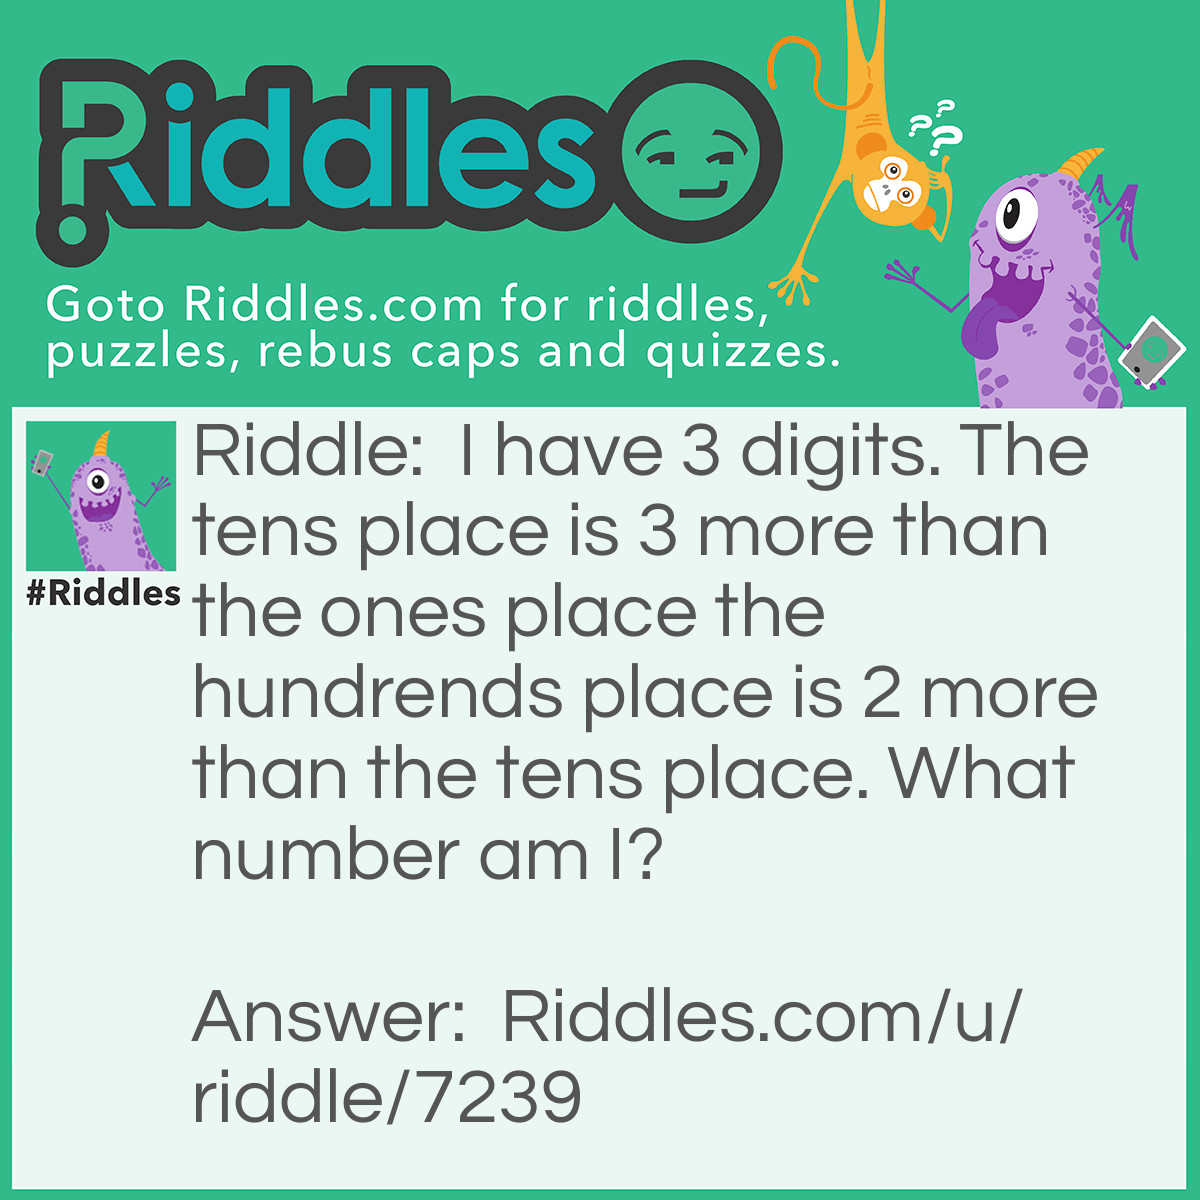 Riddle: I have 3 digits. The tens place is 3 more than the ones place the hundrends place is 2 more than the tens place. What number am I? Answer: 863!